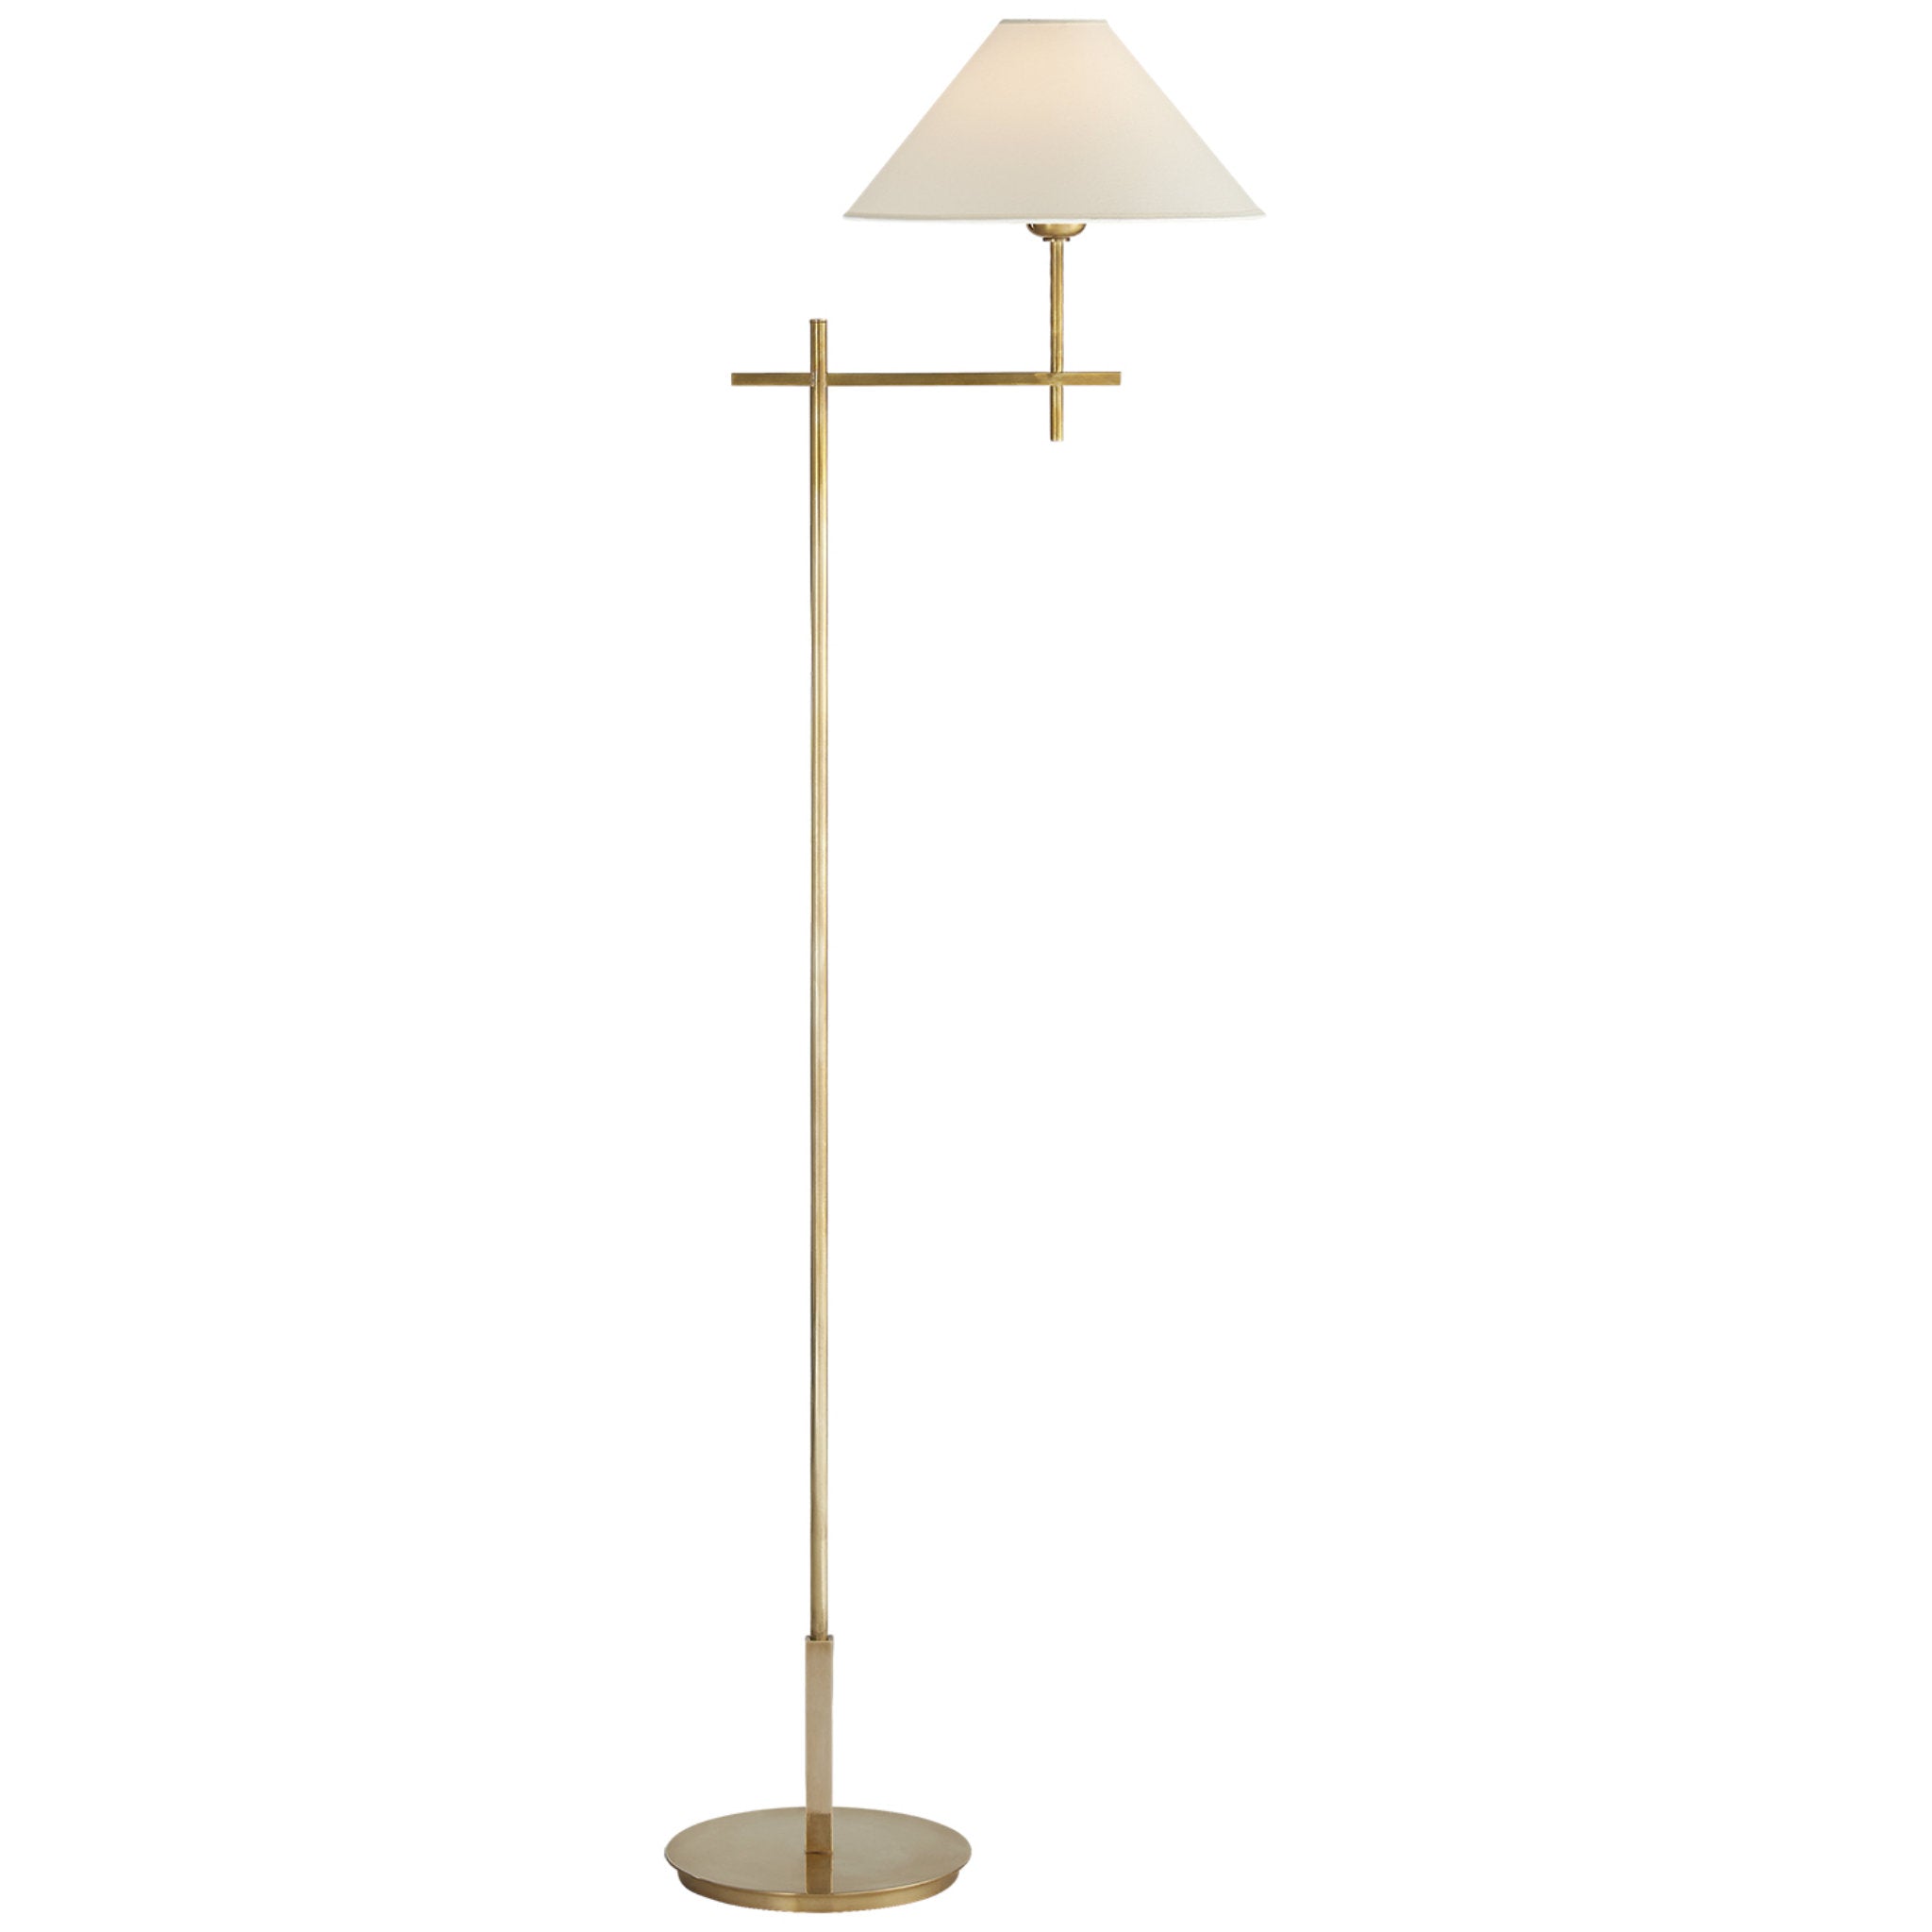 J. Randall Powers Hackney Bridge Arm Floor Lamp in Hand-Rubbed Antique Brass with Natural Paper Shade